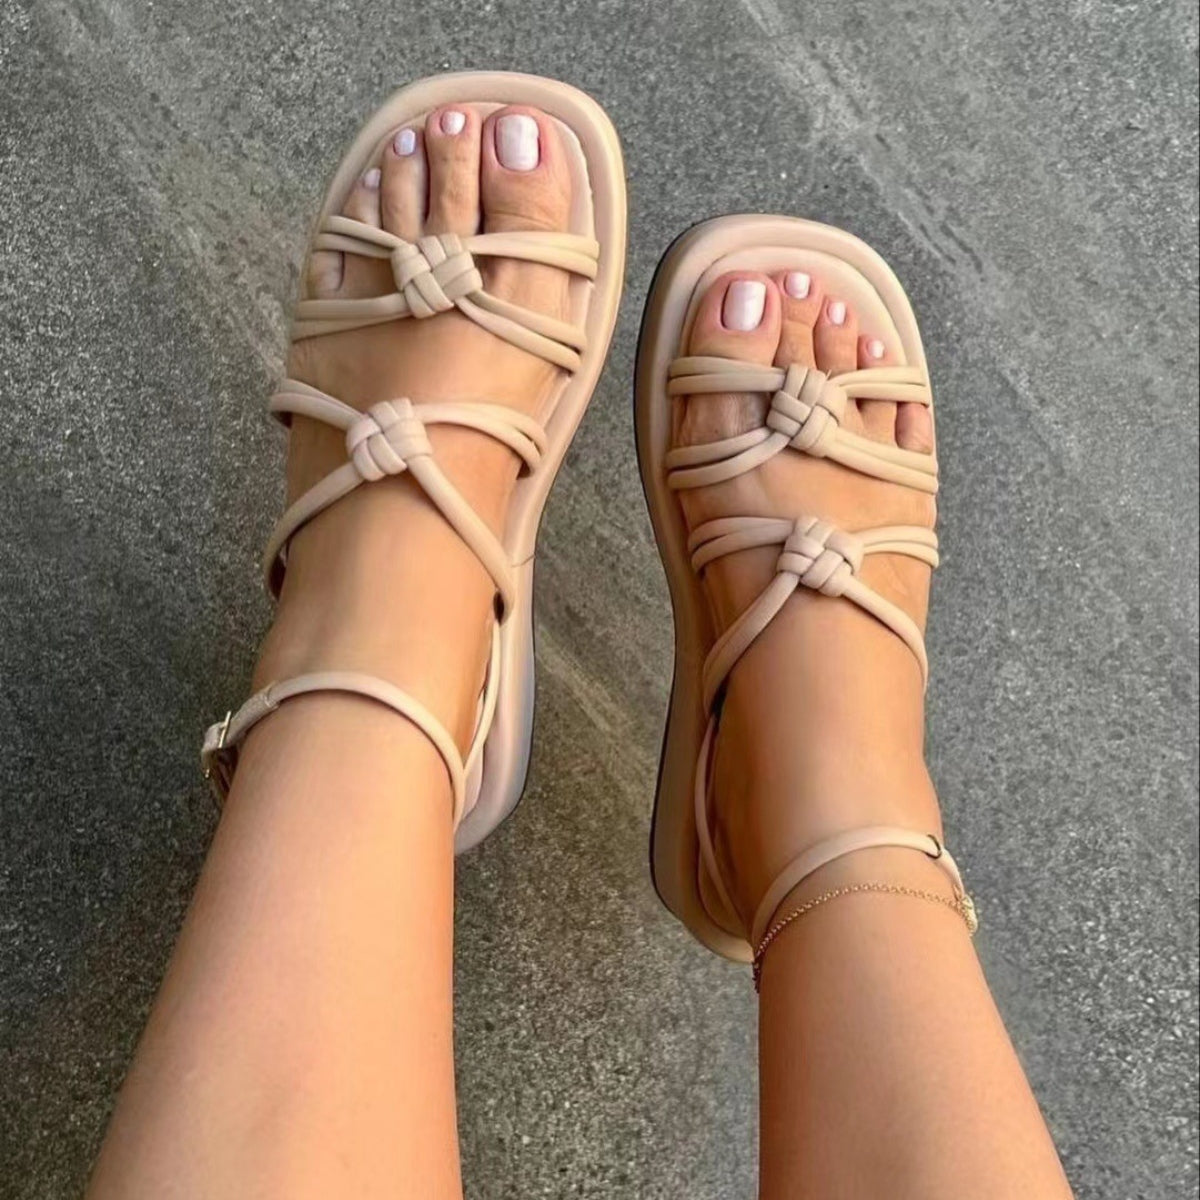 Explore More Collection - PU Leather Knot Cutout Sandals